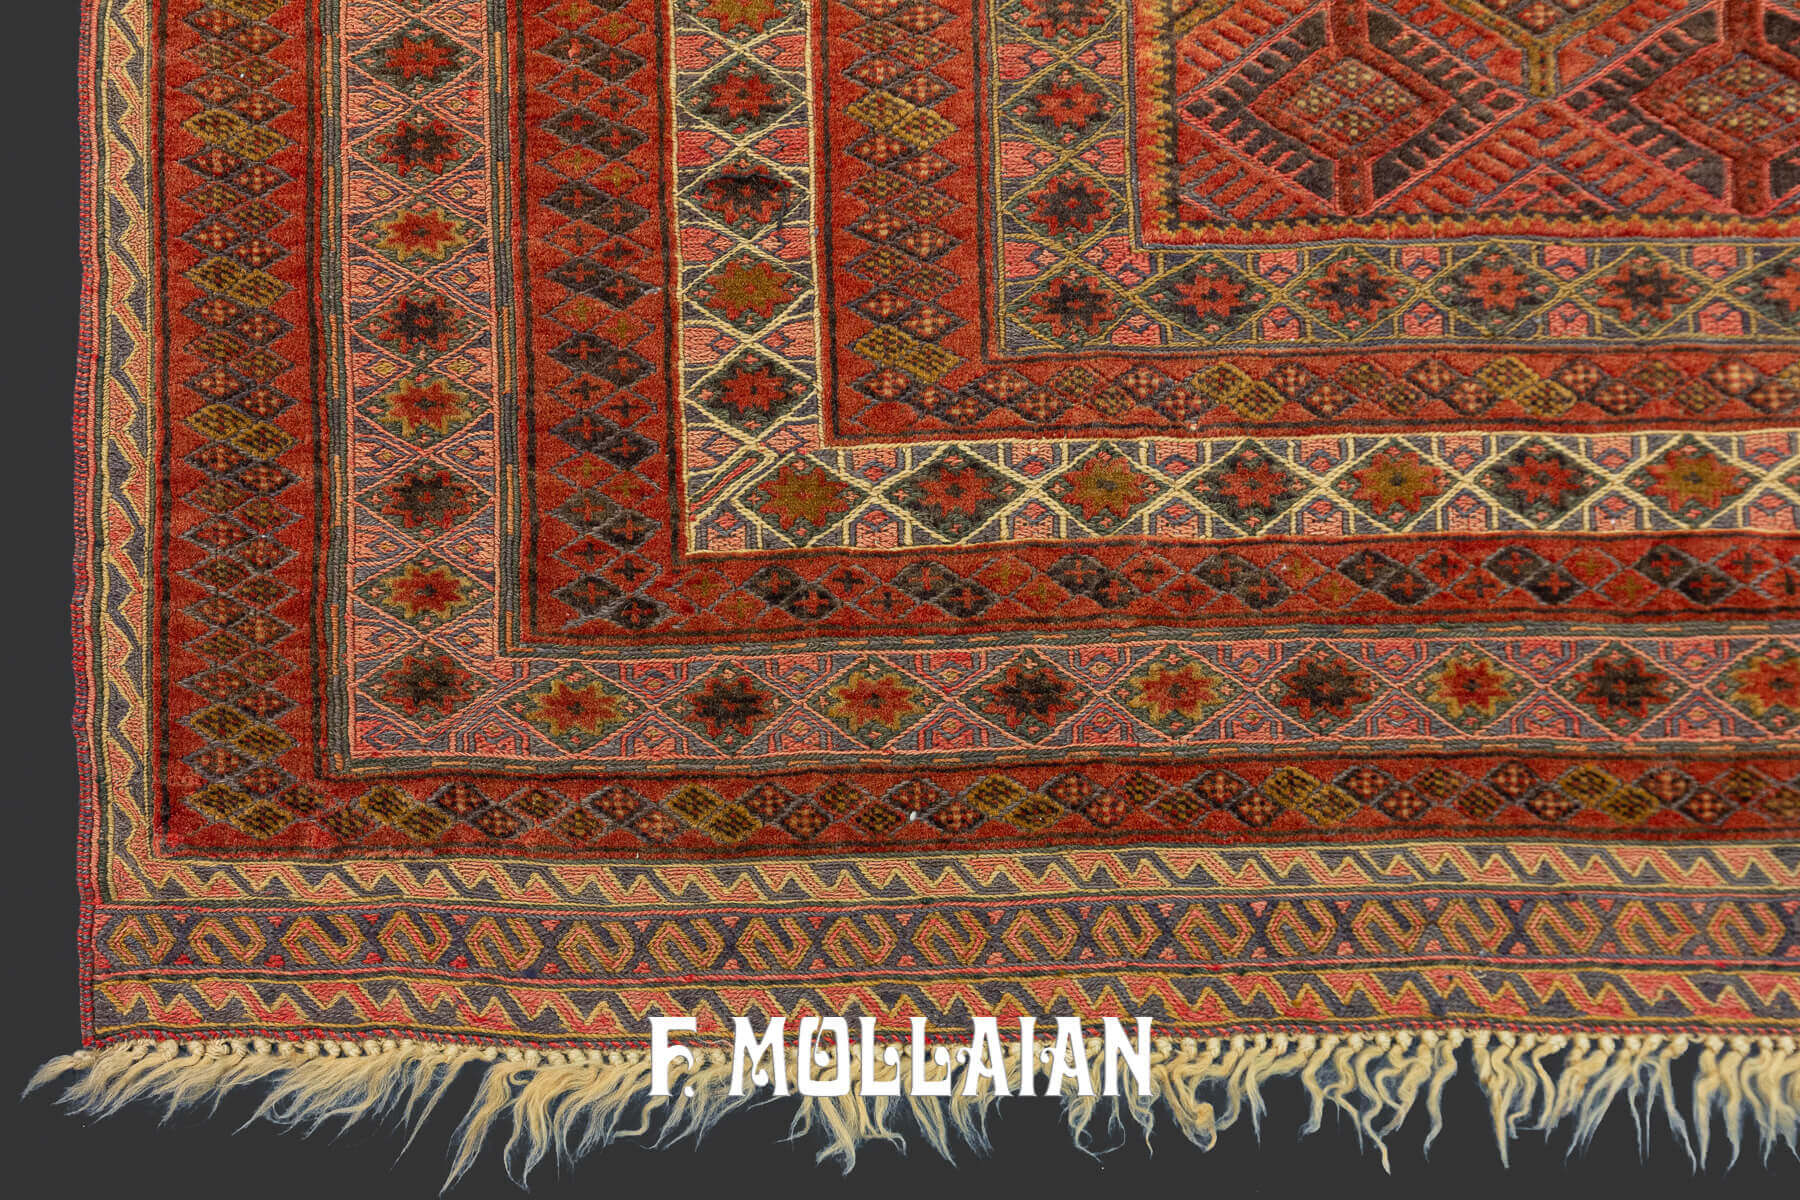 Rare Antique Persian Baluch Rug with both Hand-knotted and Hand woven (Sumak baf) parts n°:99091455